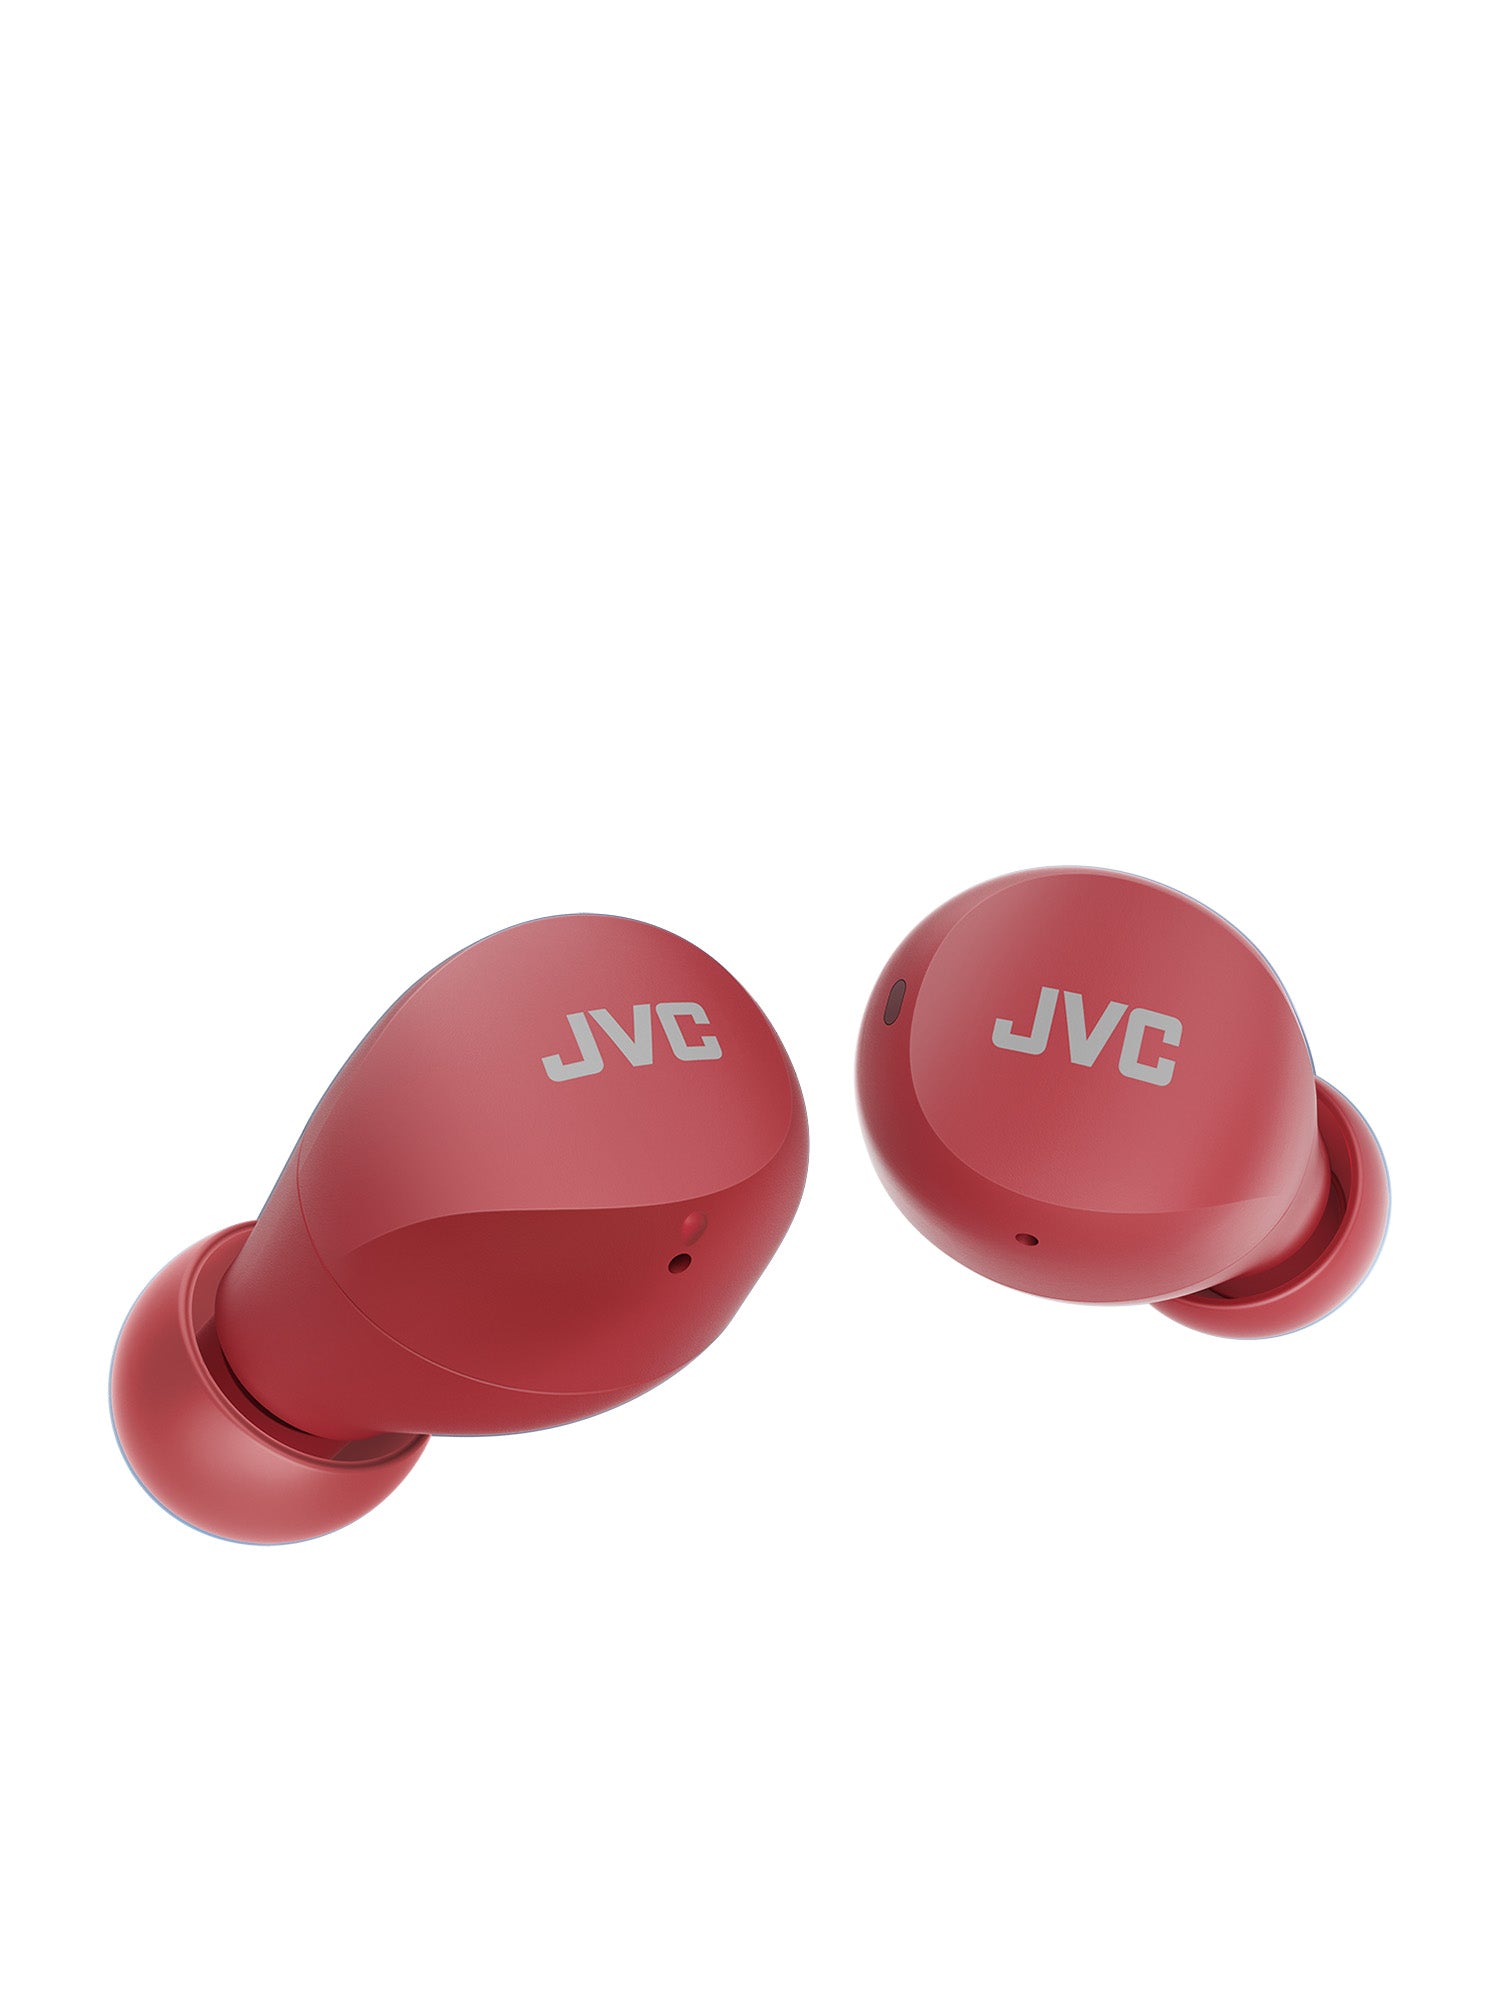 HA-A6T-R in Red Gumy mini wireless earbuds by JVC